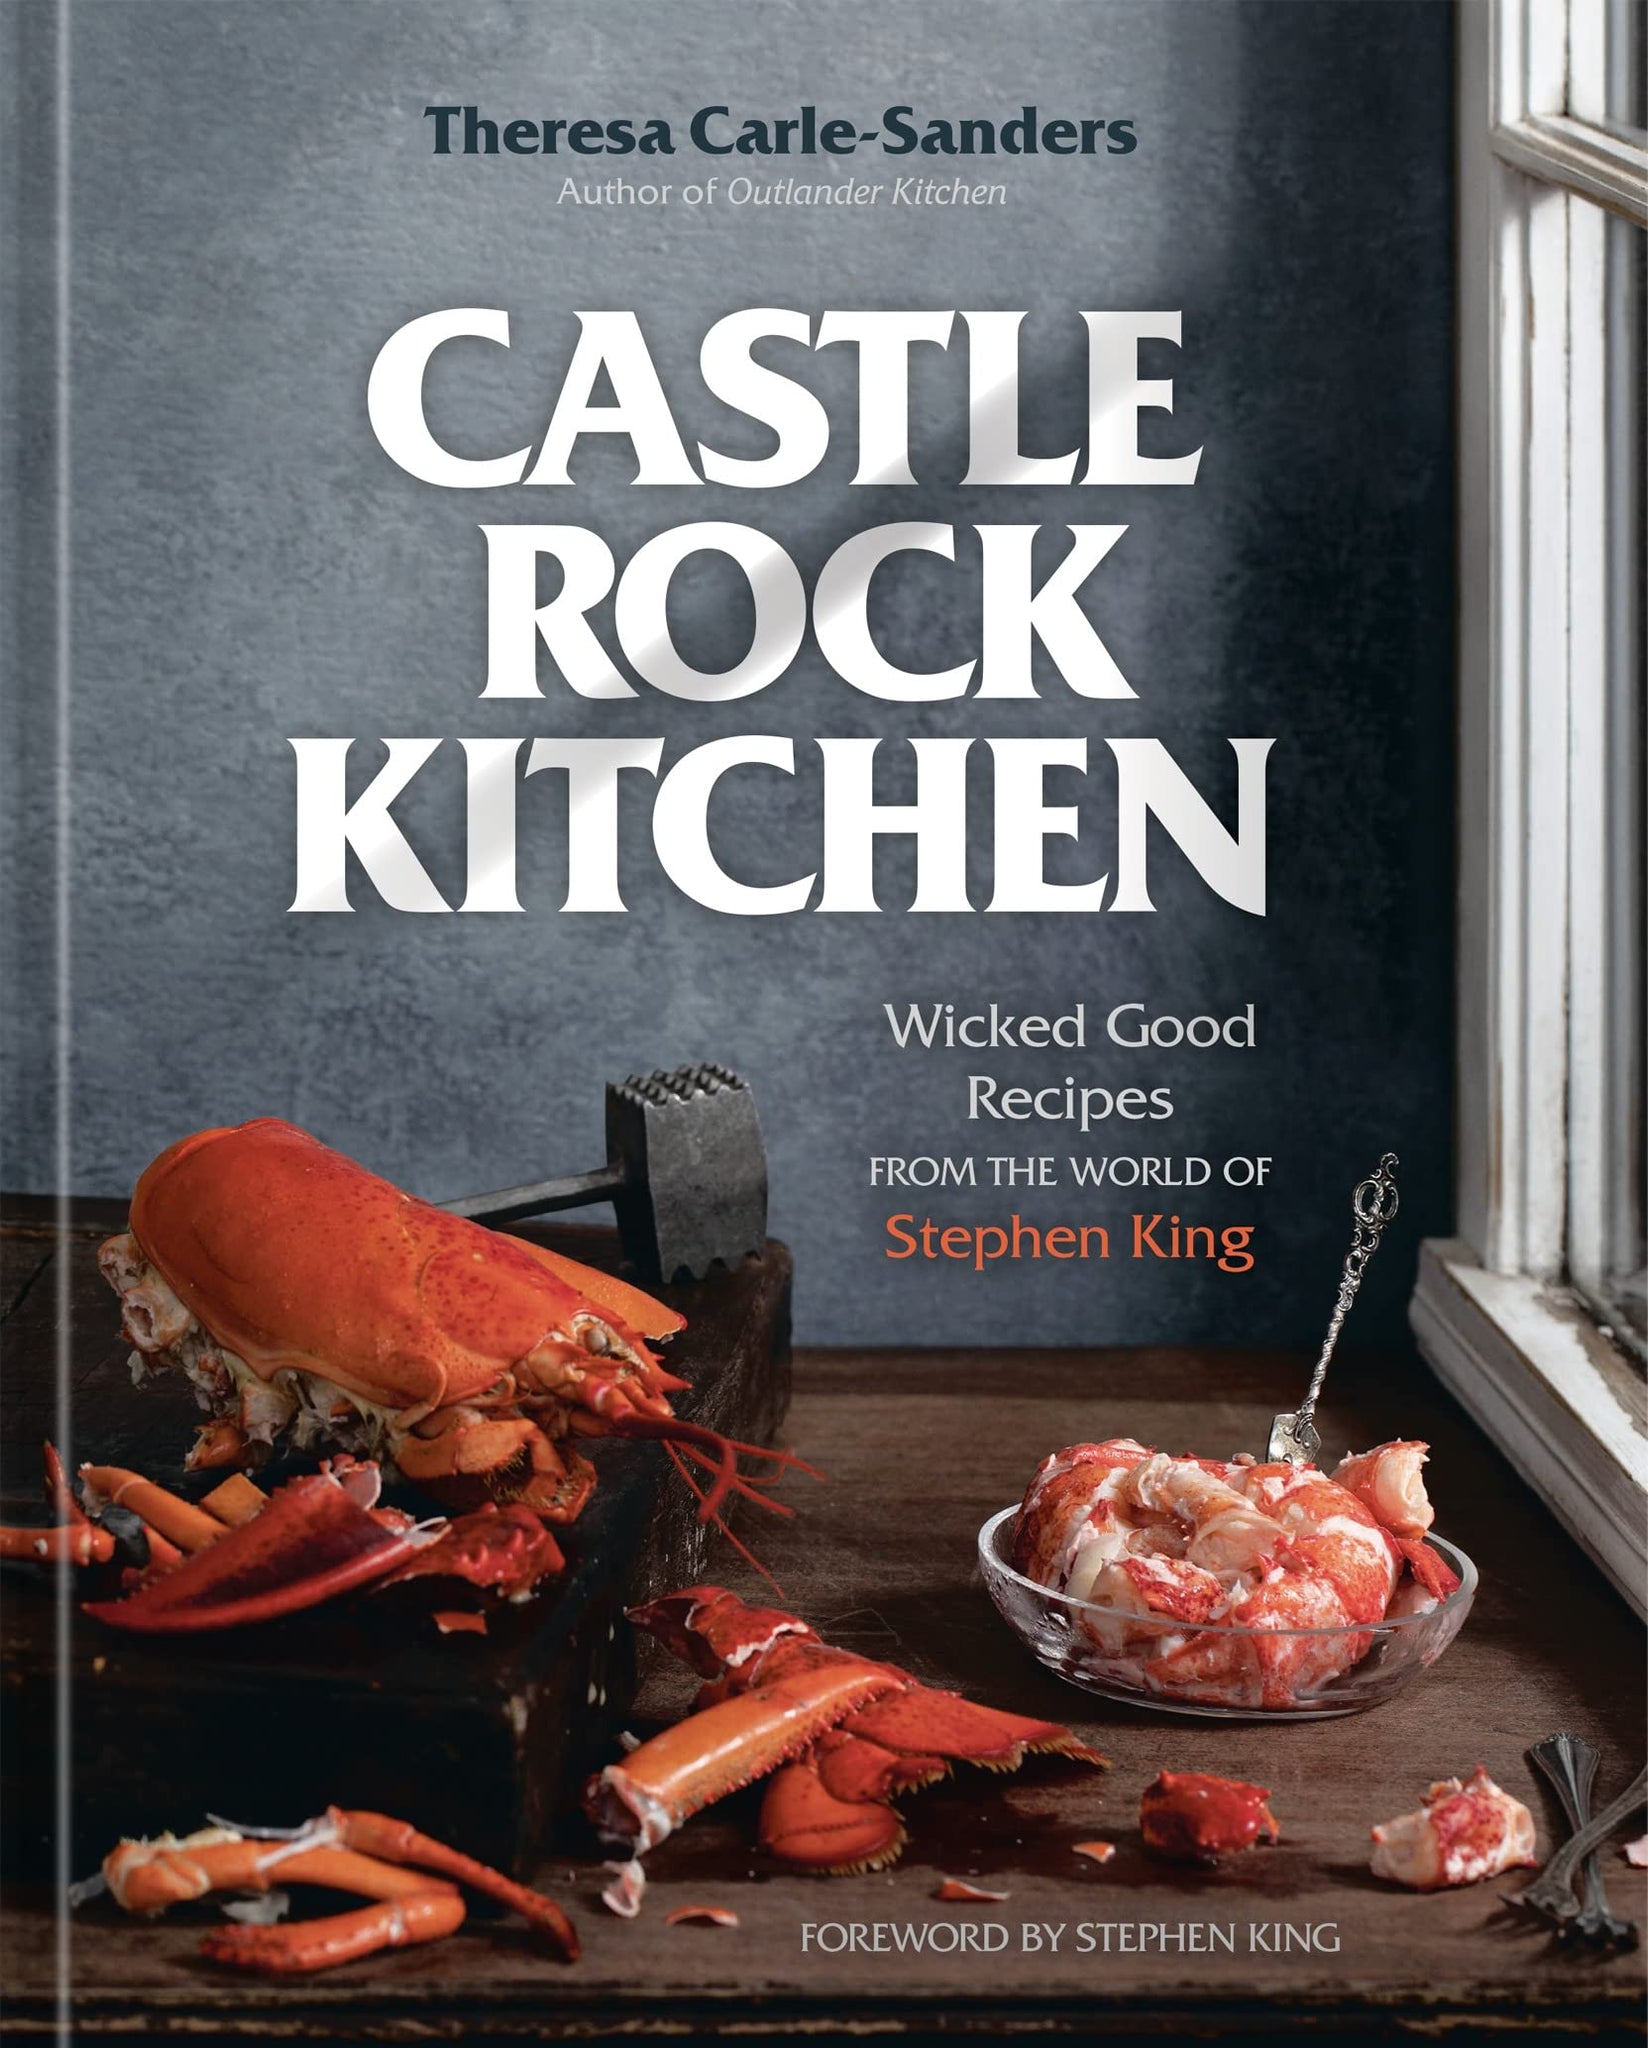 Castle Rock Kitchen : Wicked Good Recipes from the World of Stephen King by Theresa Carle-Sanders